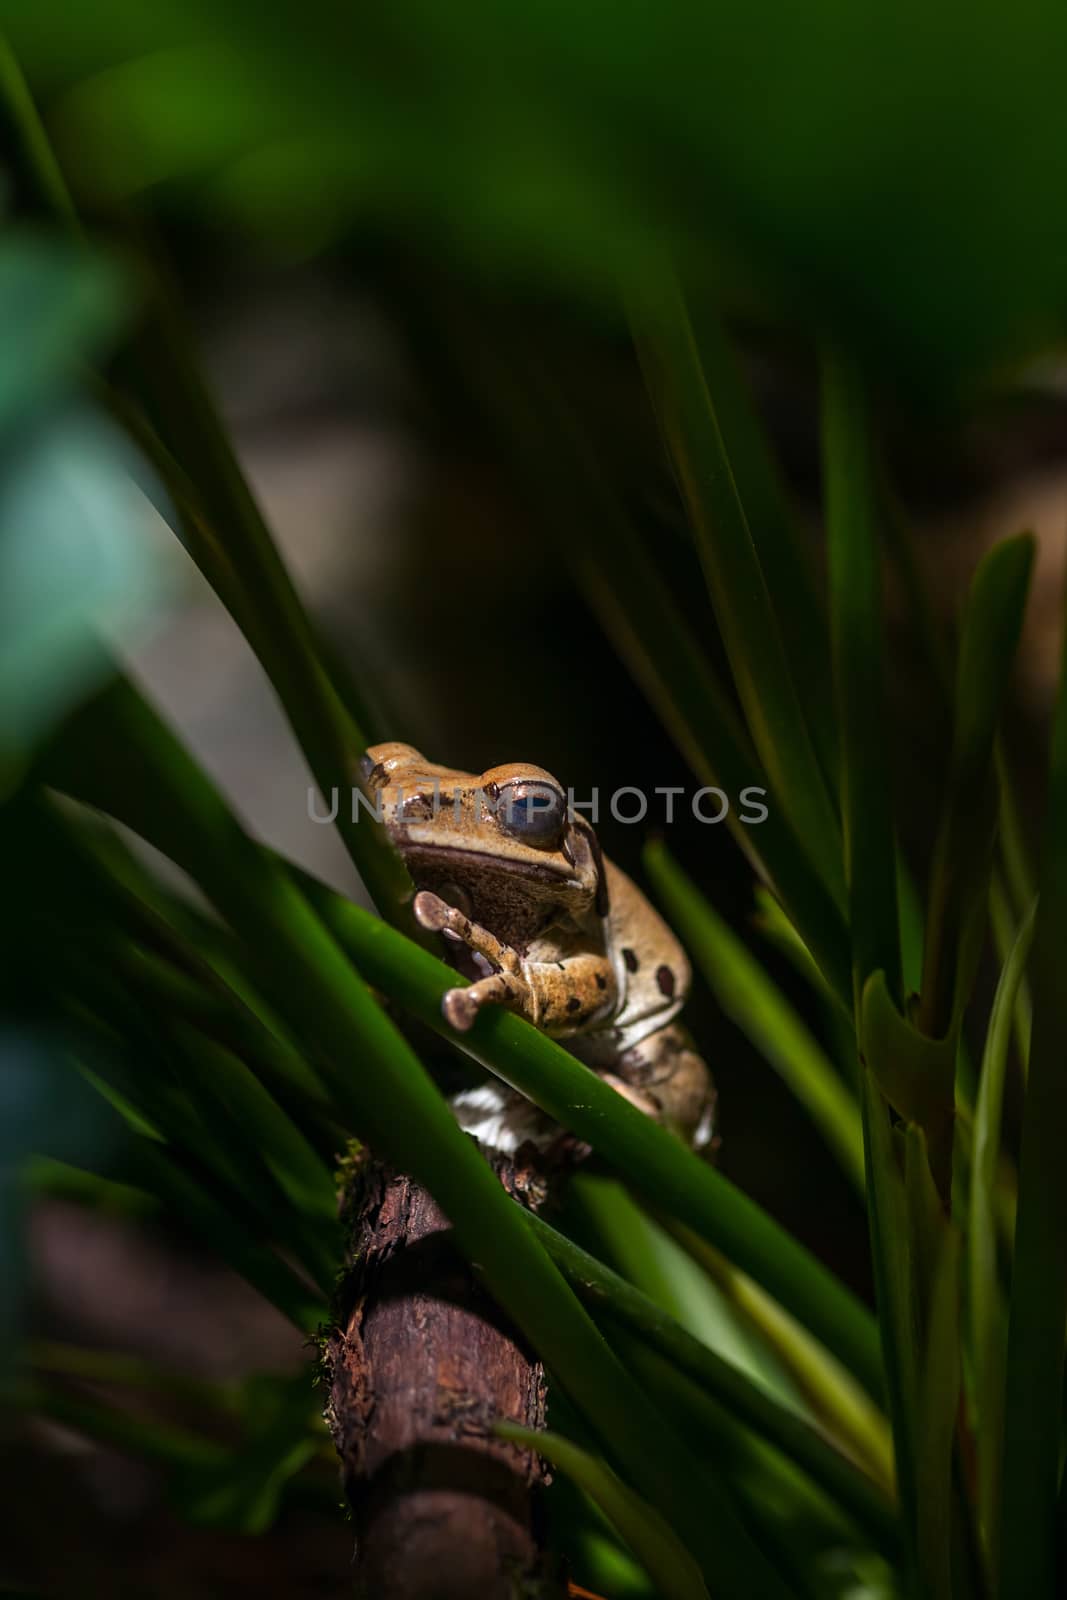 Brown frog on green stems by master1305